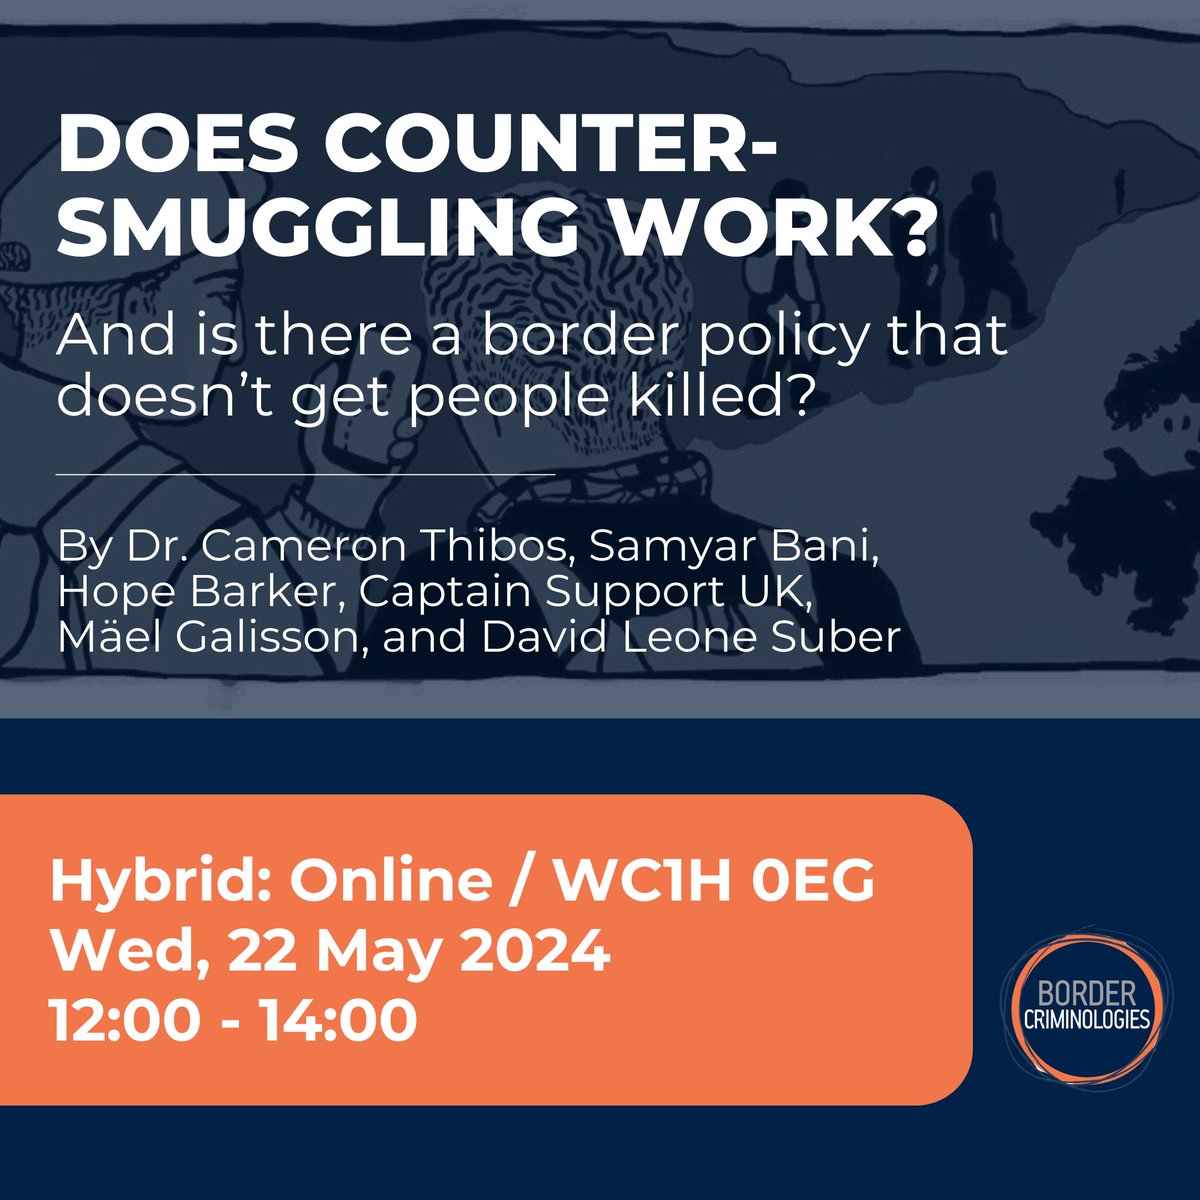 [Event Reminder 🗓️] Don't miss Wednesday's hybrid seminar on border enforcement, migrant deaths, & humane policies. Speakers working across key borders in Europe and the Channel will share first-hand accounts of the effects of counter-smuggling. RSVP now: law.ox.ac.uk/content/event/…